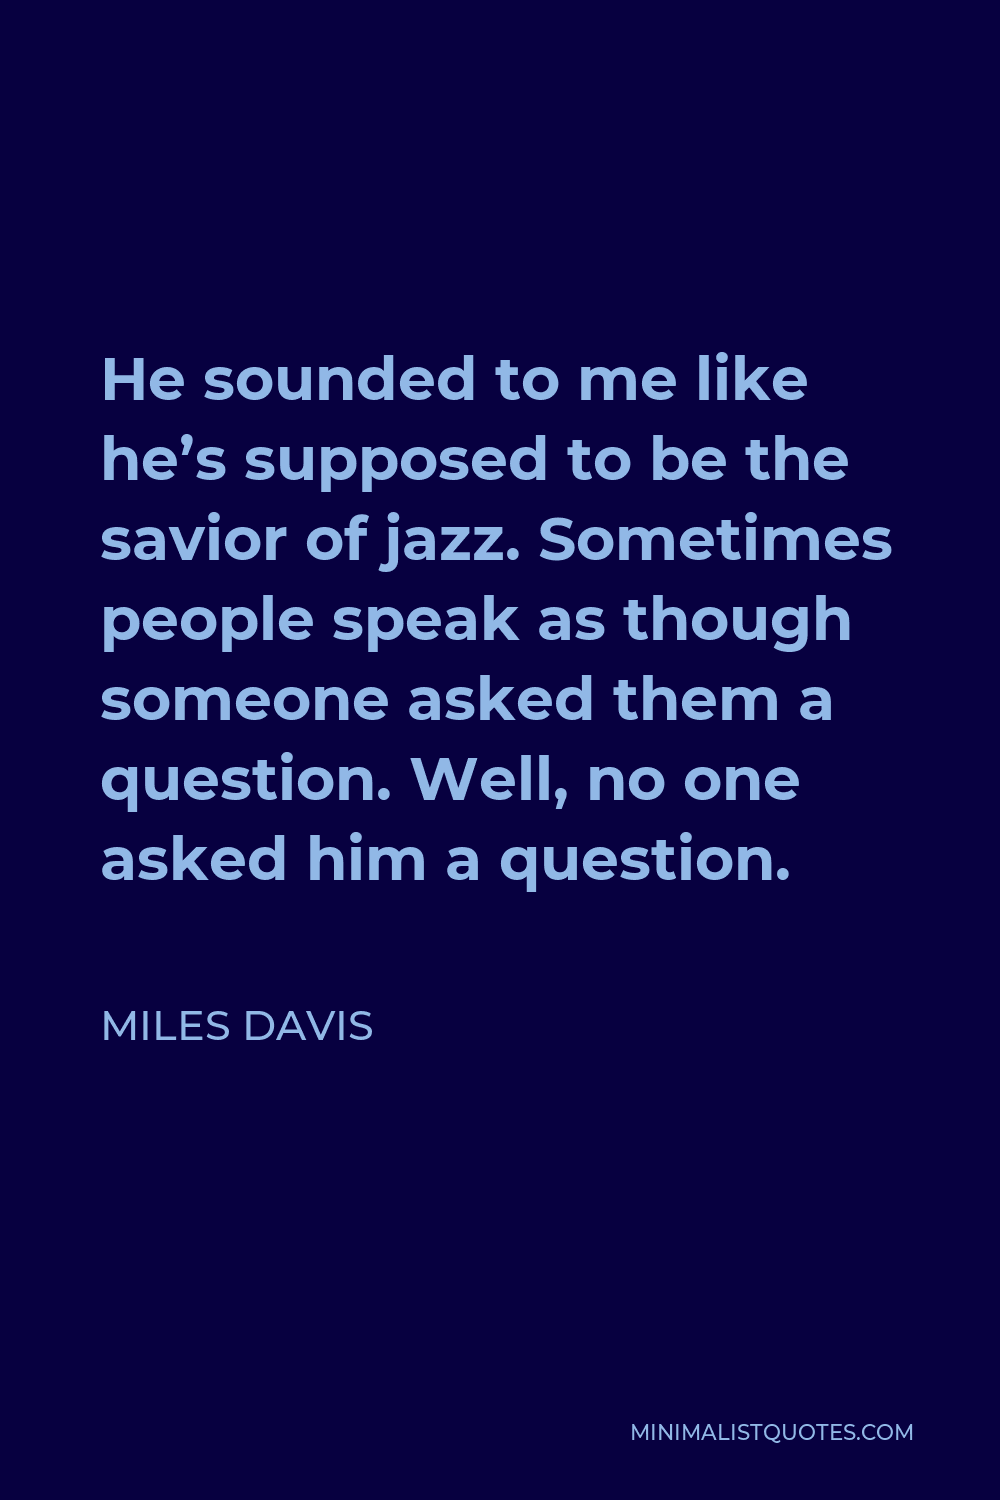 Miles Davis Quote - He sounded to me like he’s supposed to be the savior of jazz. Sometimes people speak as though someone asked them a question. Well, no one asked him a question.